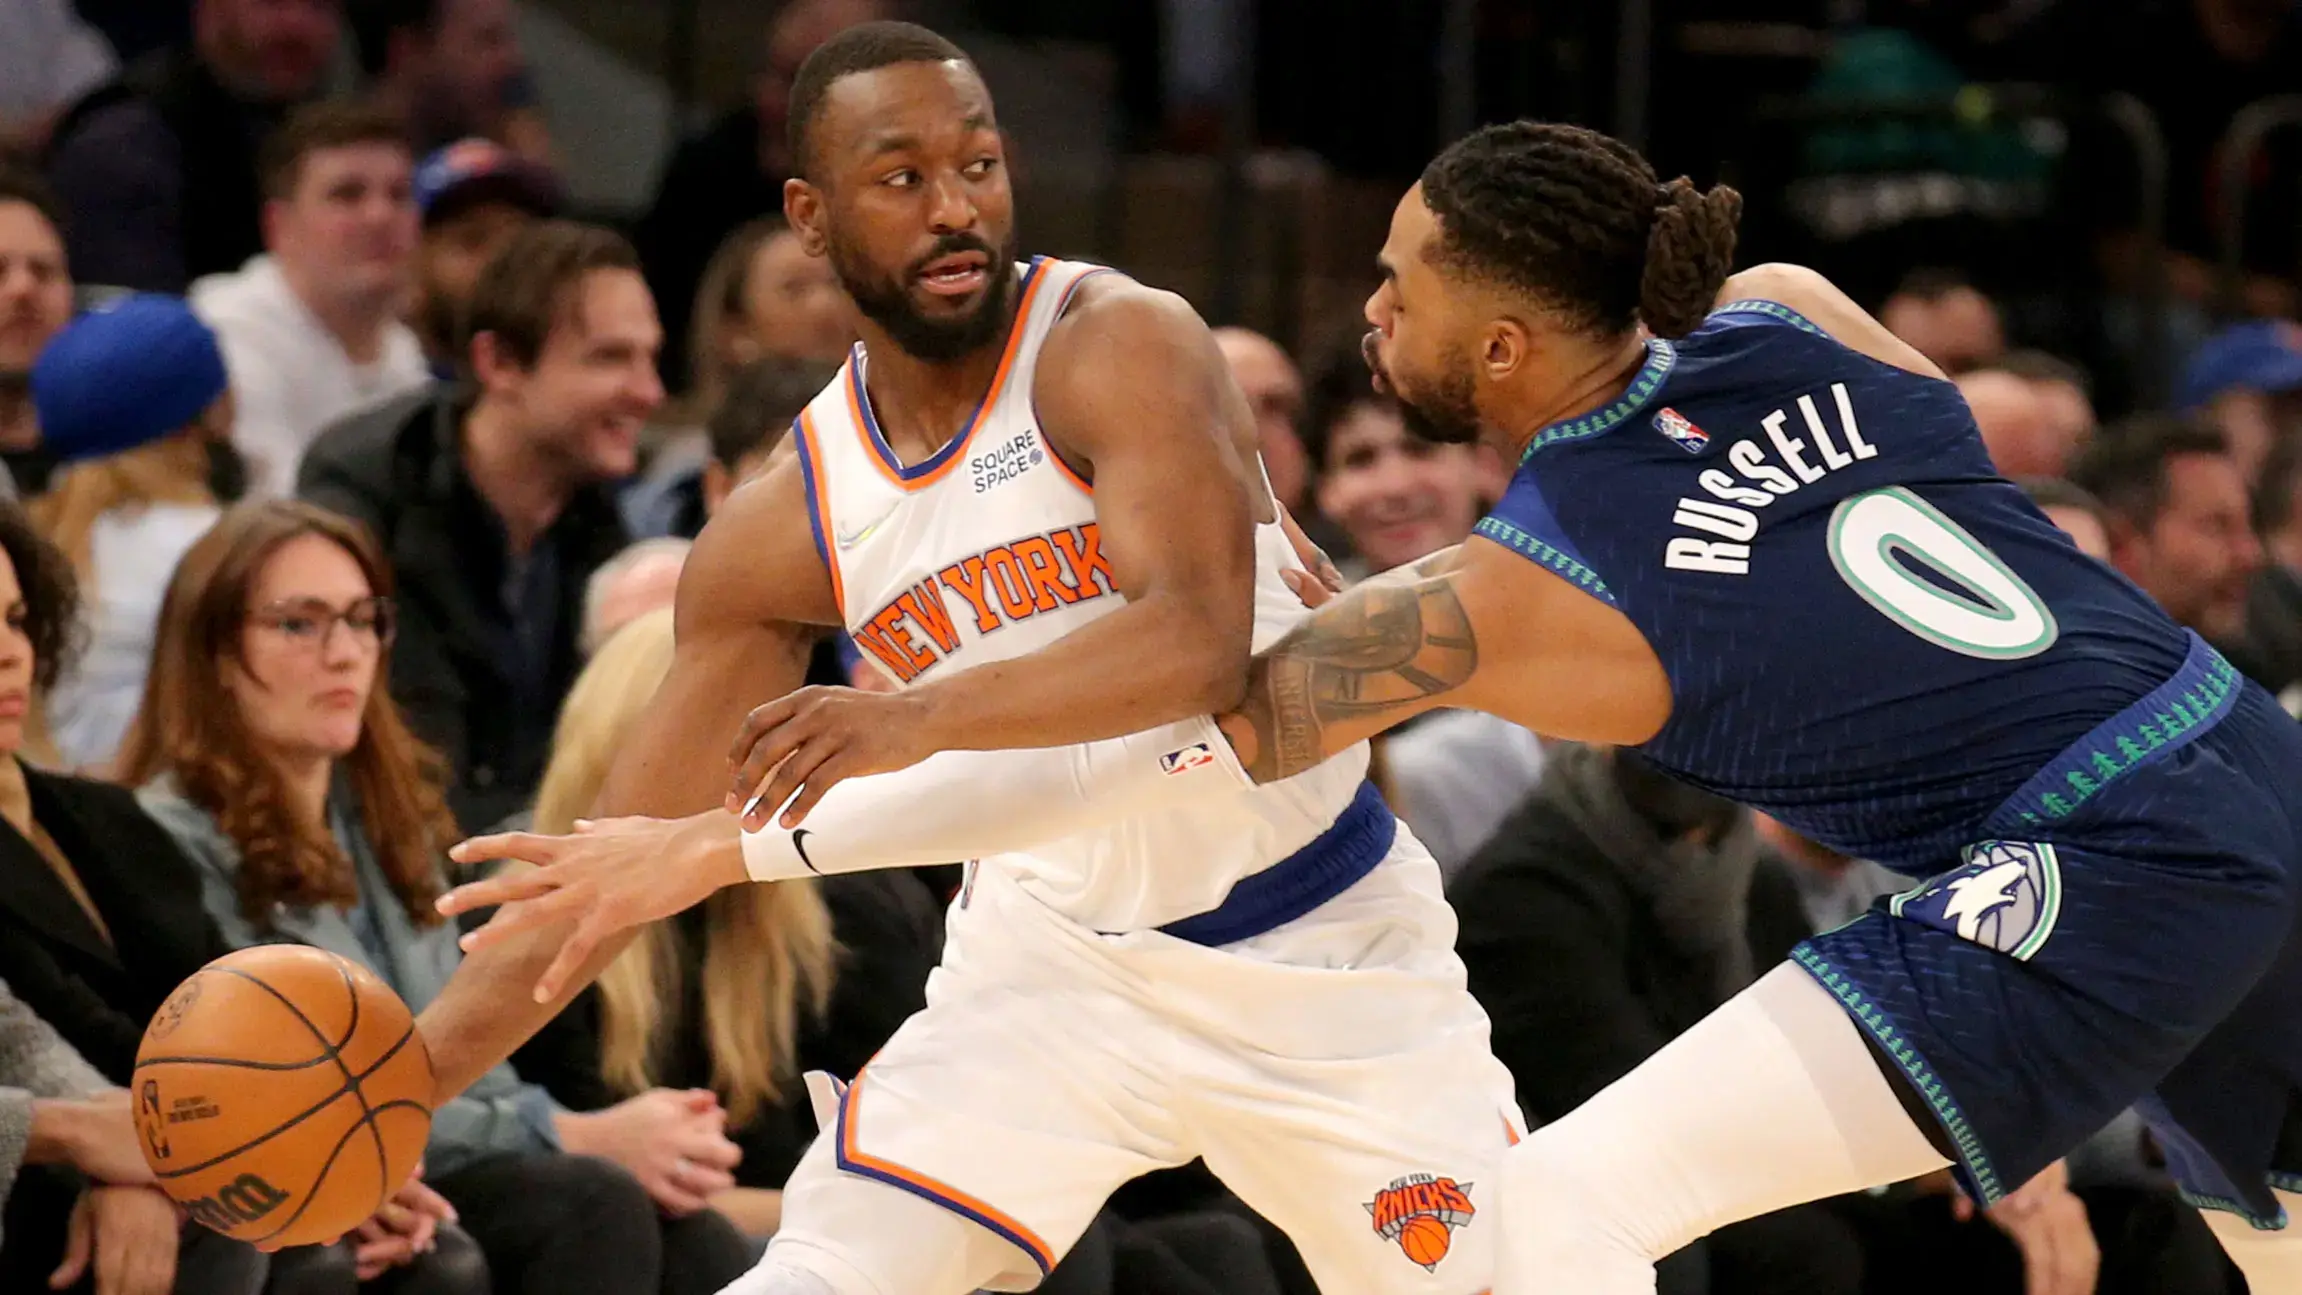 Jan 18, 2022; New York, New York, USA; New York Knicks guard Kemba Walker (8) controls the ball against Minnesota Timberwolves guard D'Angelo Russell (0) and forward Jarred Vanderbilt (8) during the first quarter at Madison Square Garden. / Brad Penner-USA TODAY Sports